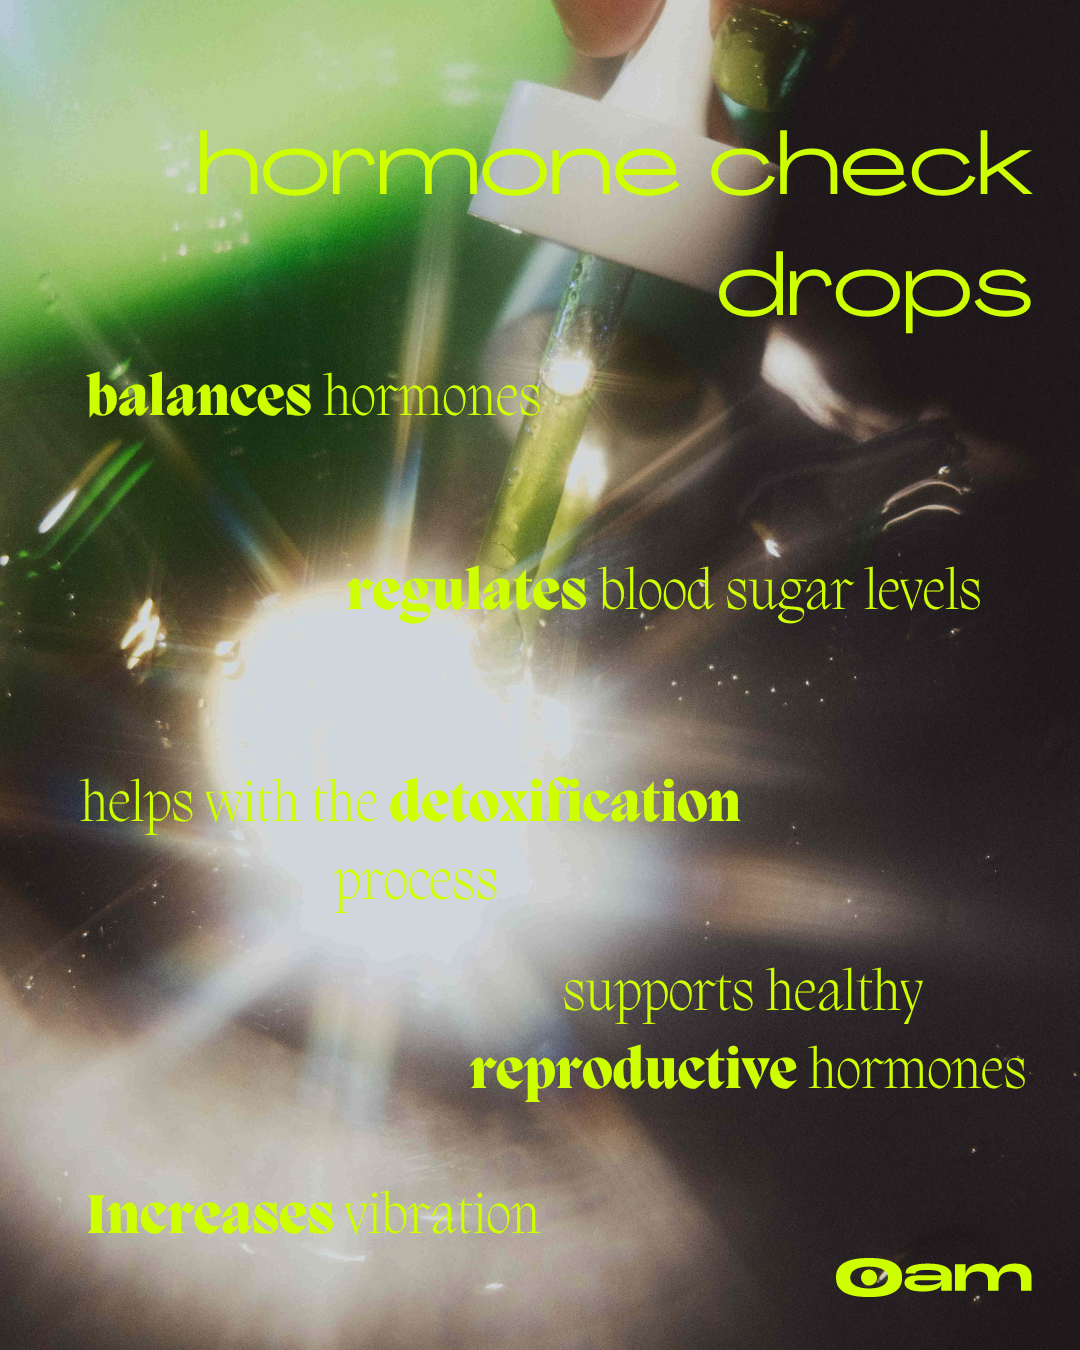 Listing the benefits of hormone check drops.